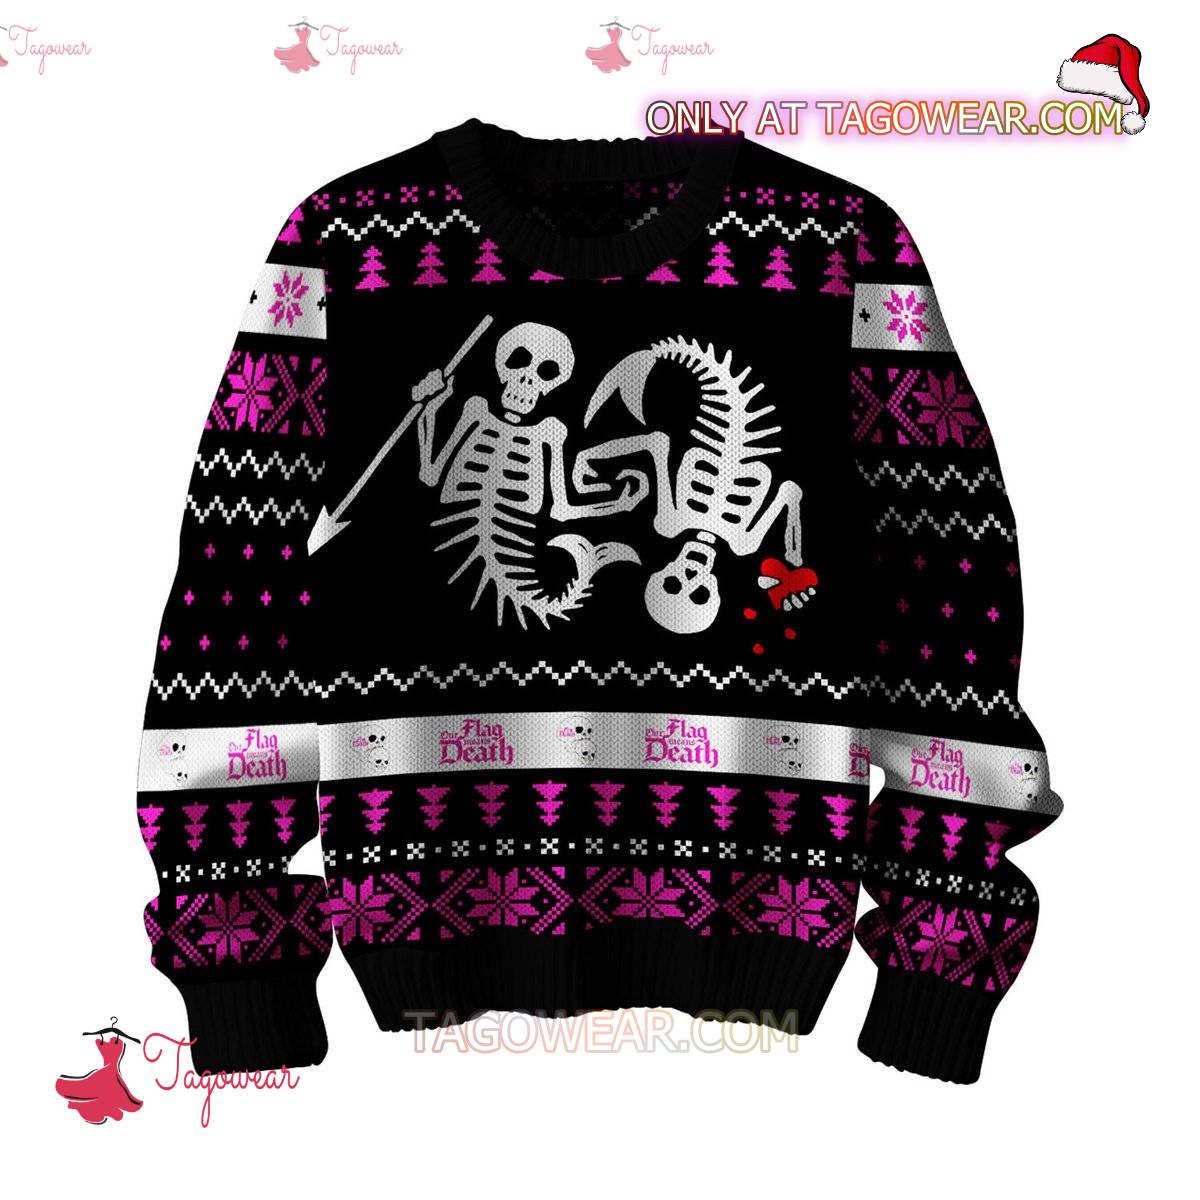 Our Flag Means Death Skull Ugly Christmas Sweater a